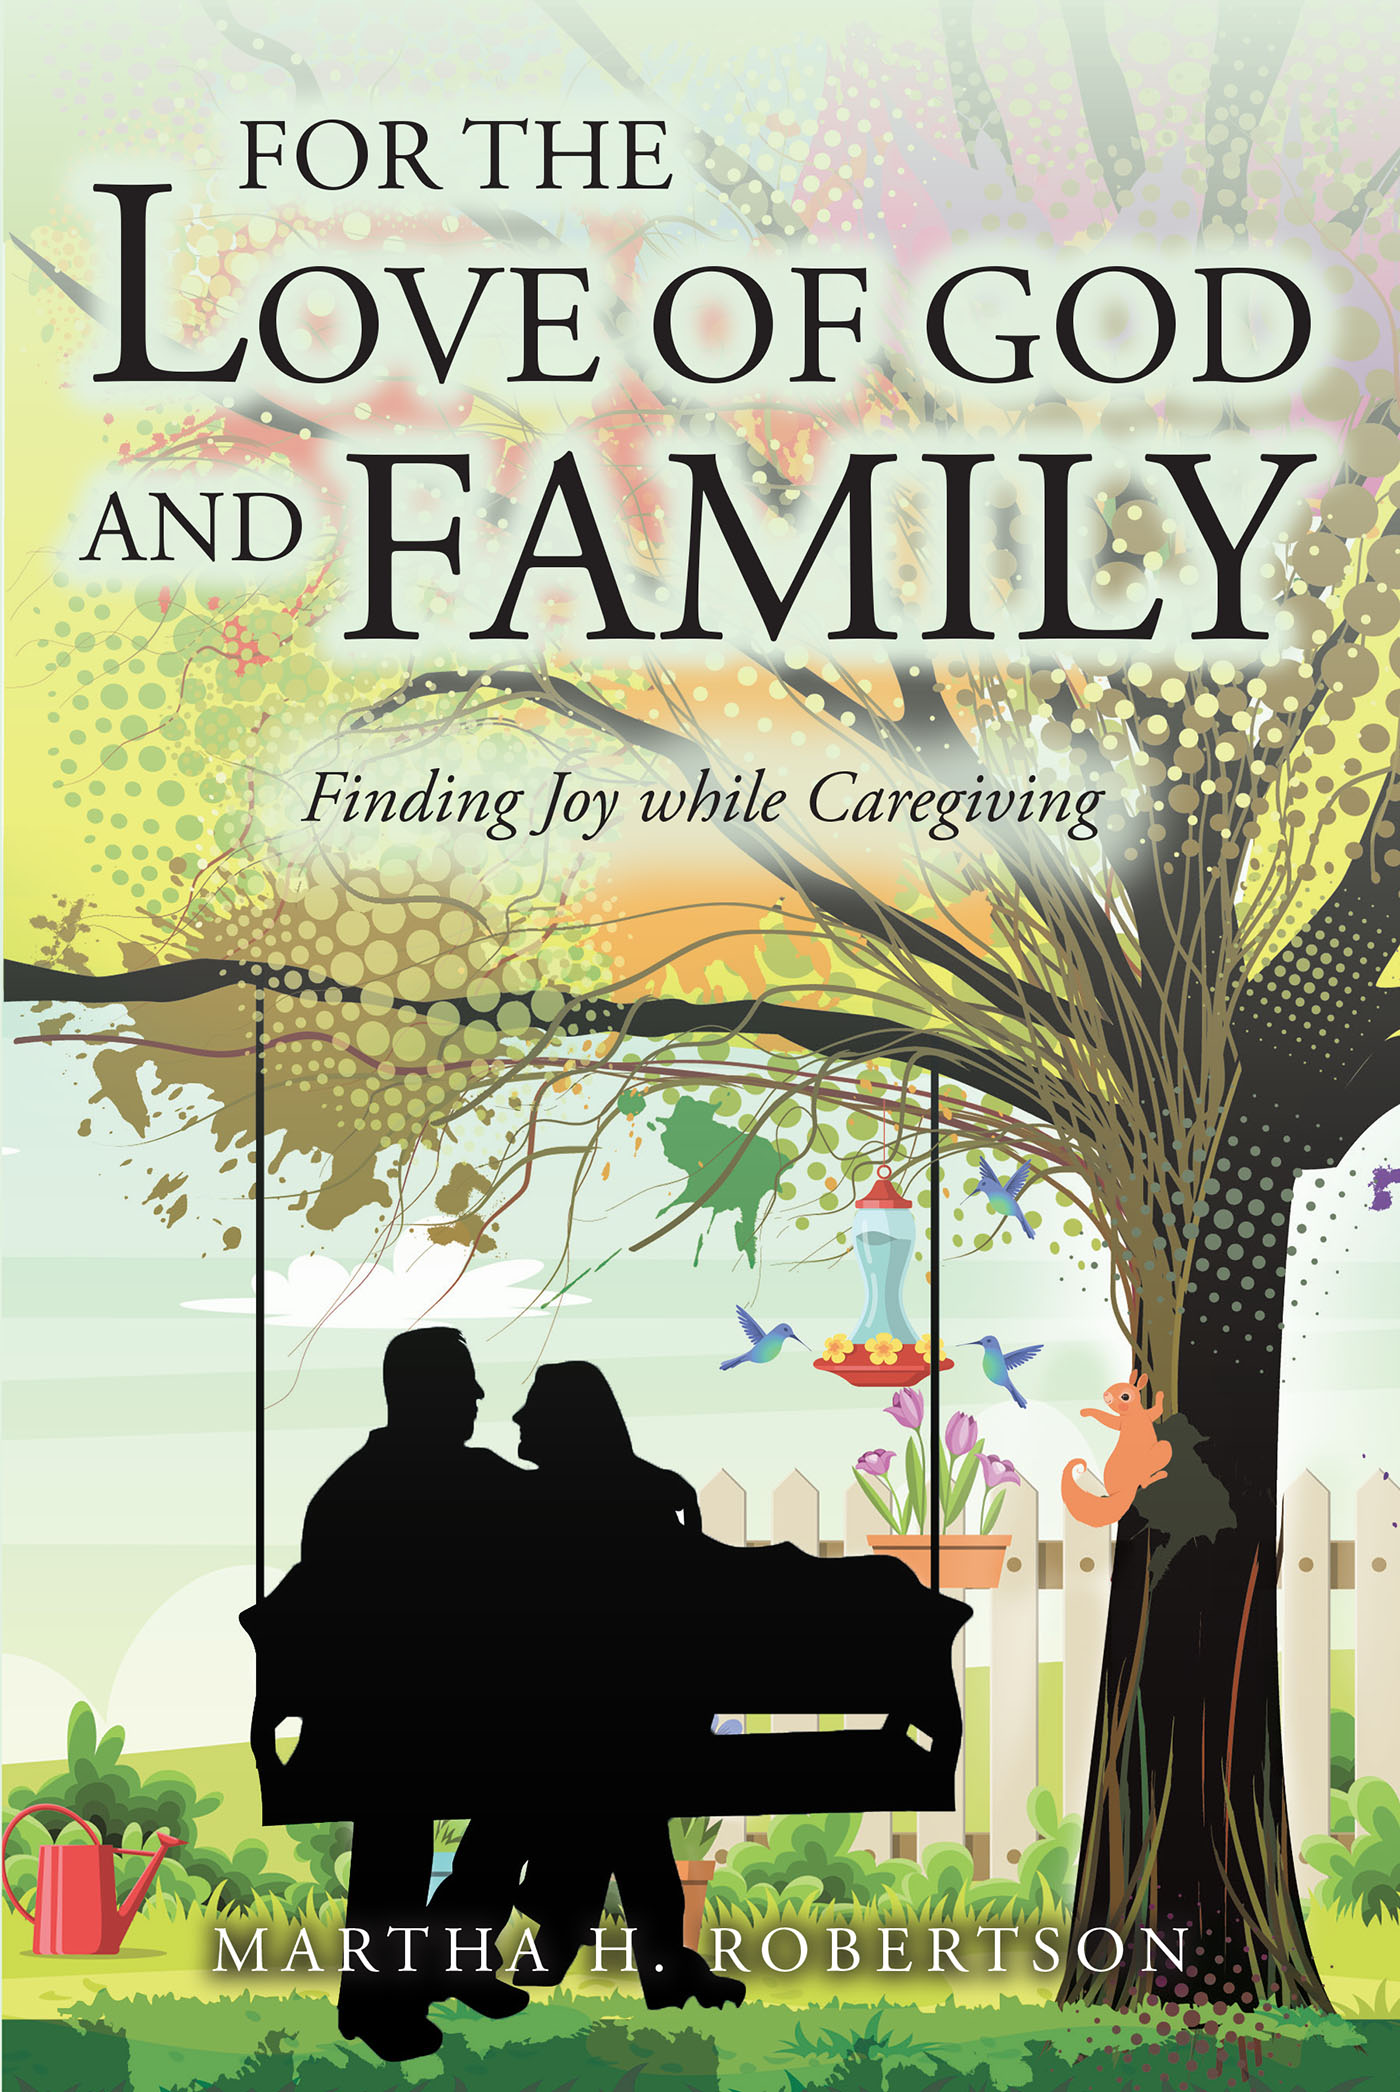 Martha H. Robertson’s Newly Released “For the Love of God and Family: Finding Joy while Caregiving” is a Touching Firsthand Account of the Highs and Lows of Caregiving